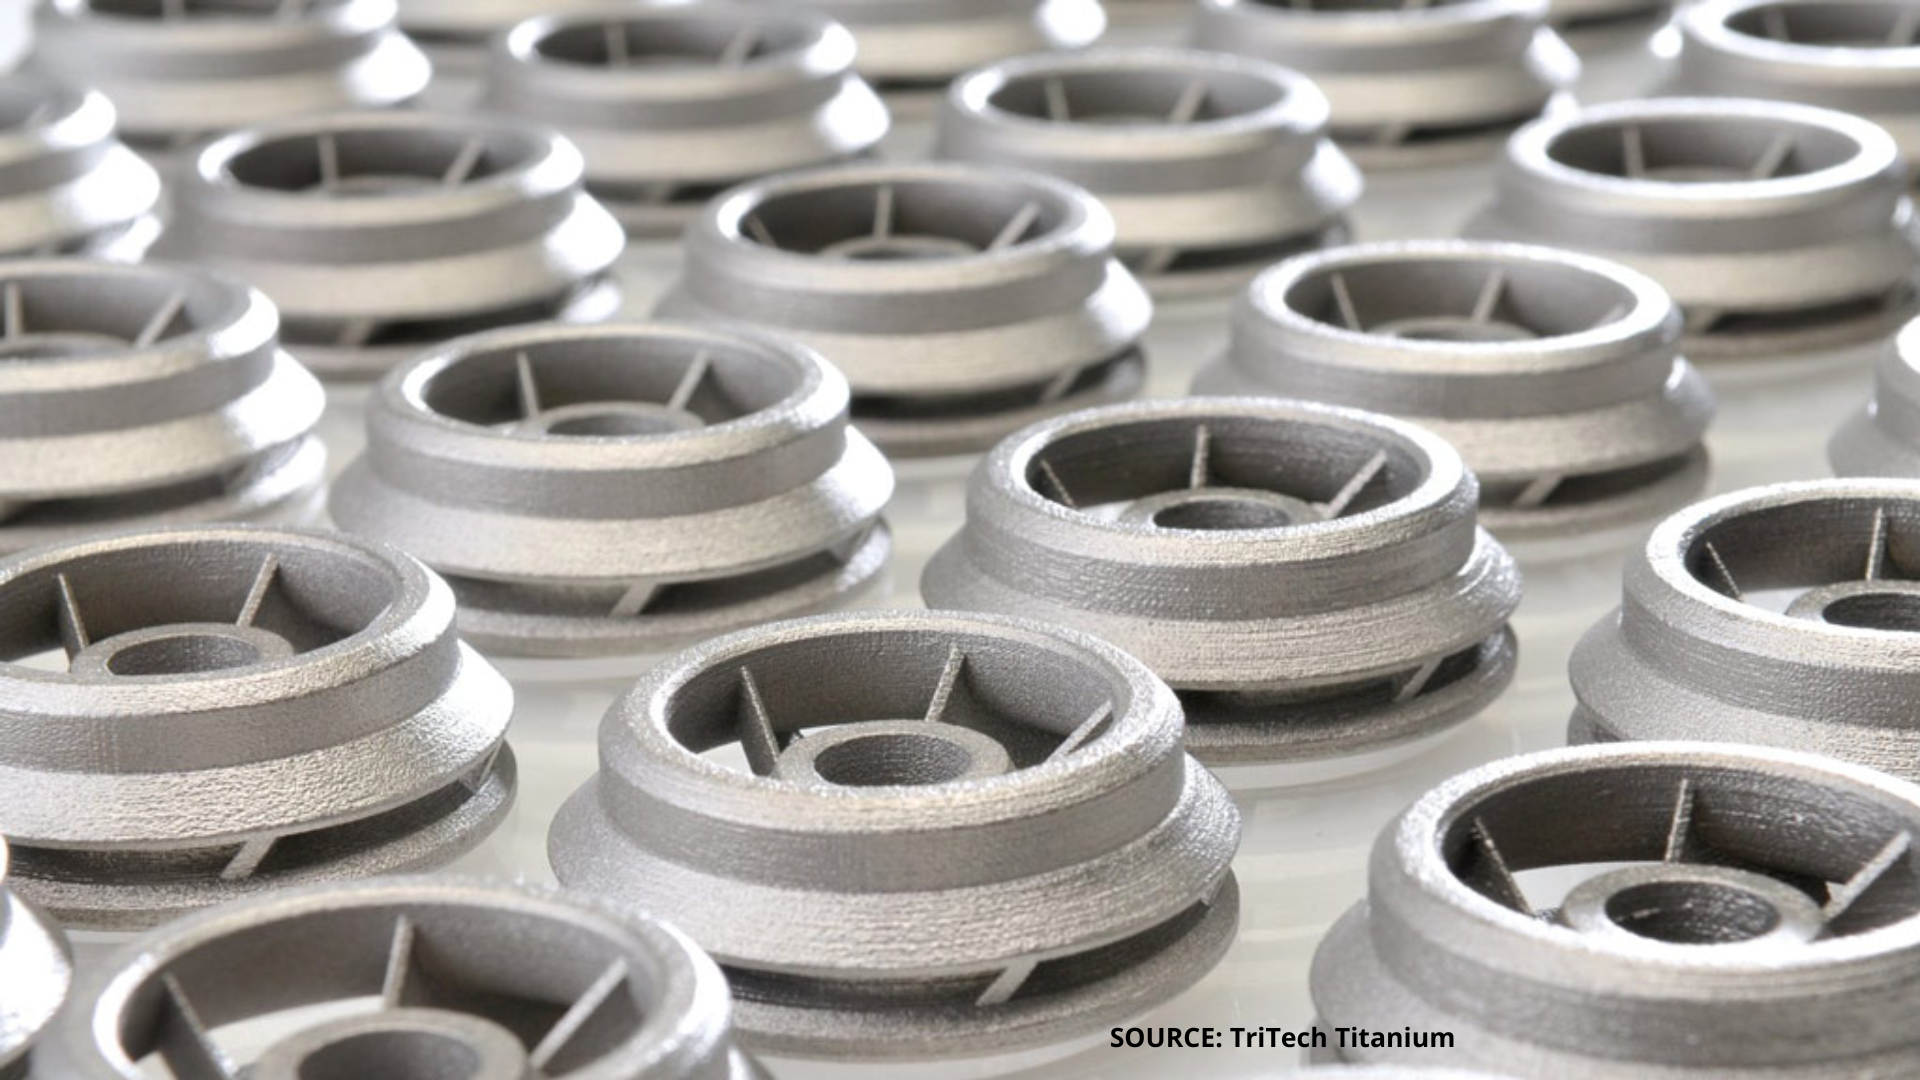 TriTech Titanium Parts was launched on April 5, 2022. a spin-off of AmeriTi Manufacturing which focuses on titanium products from recycled material.